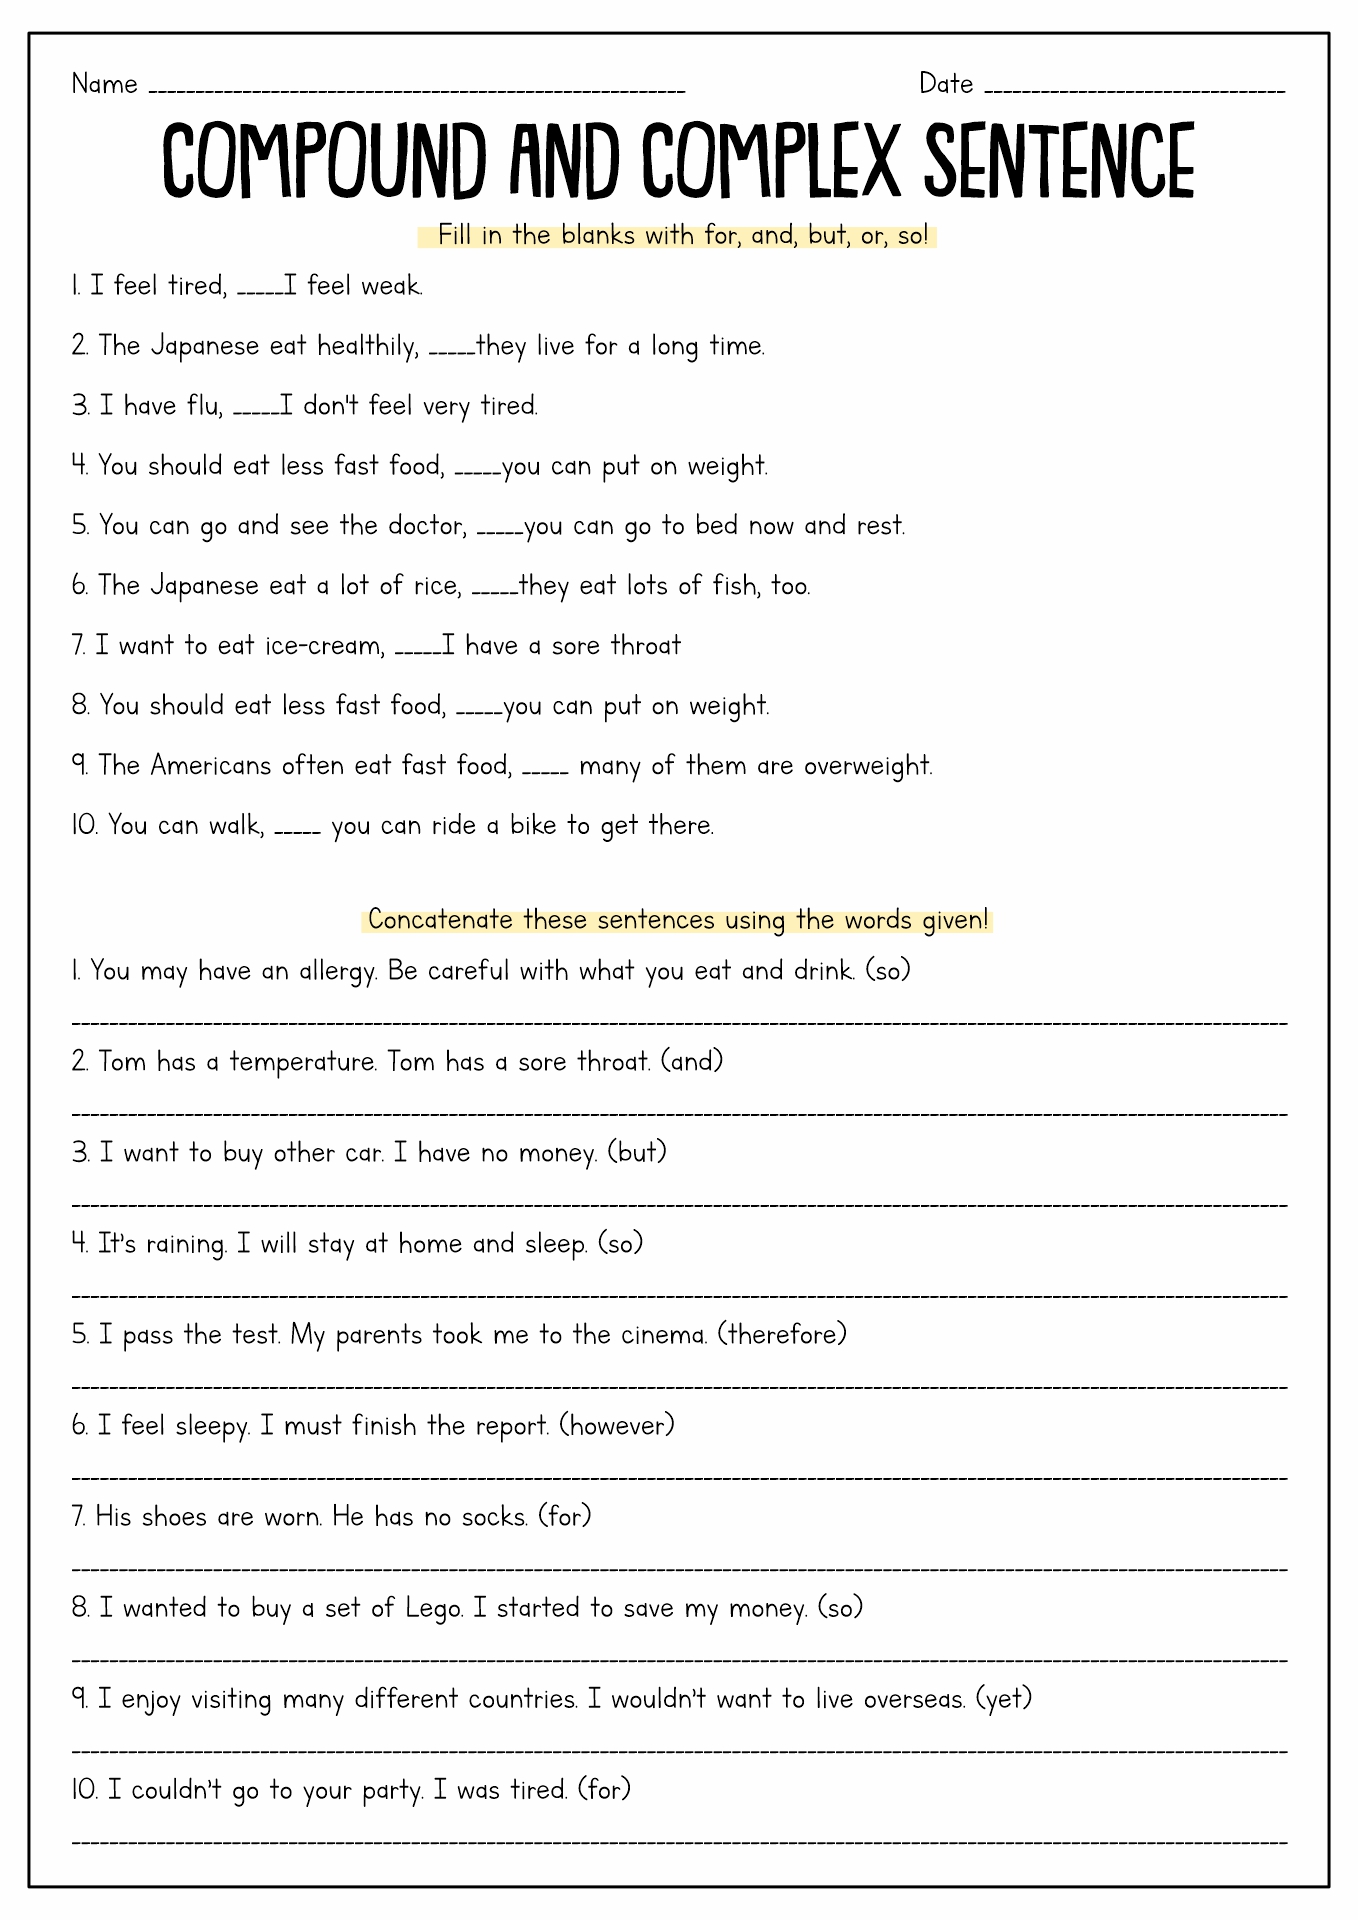 Simple Complex And Compound Sentences Worksheet With Answers